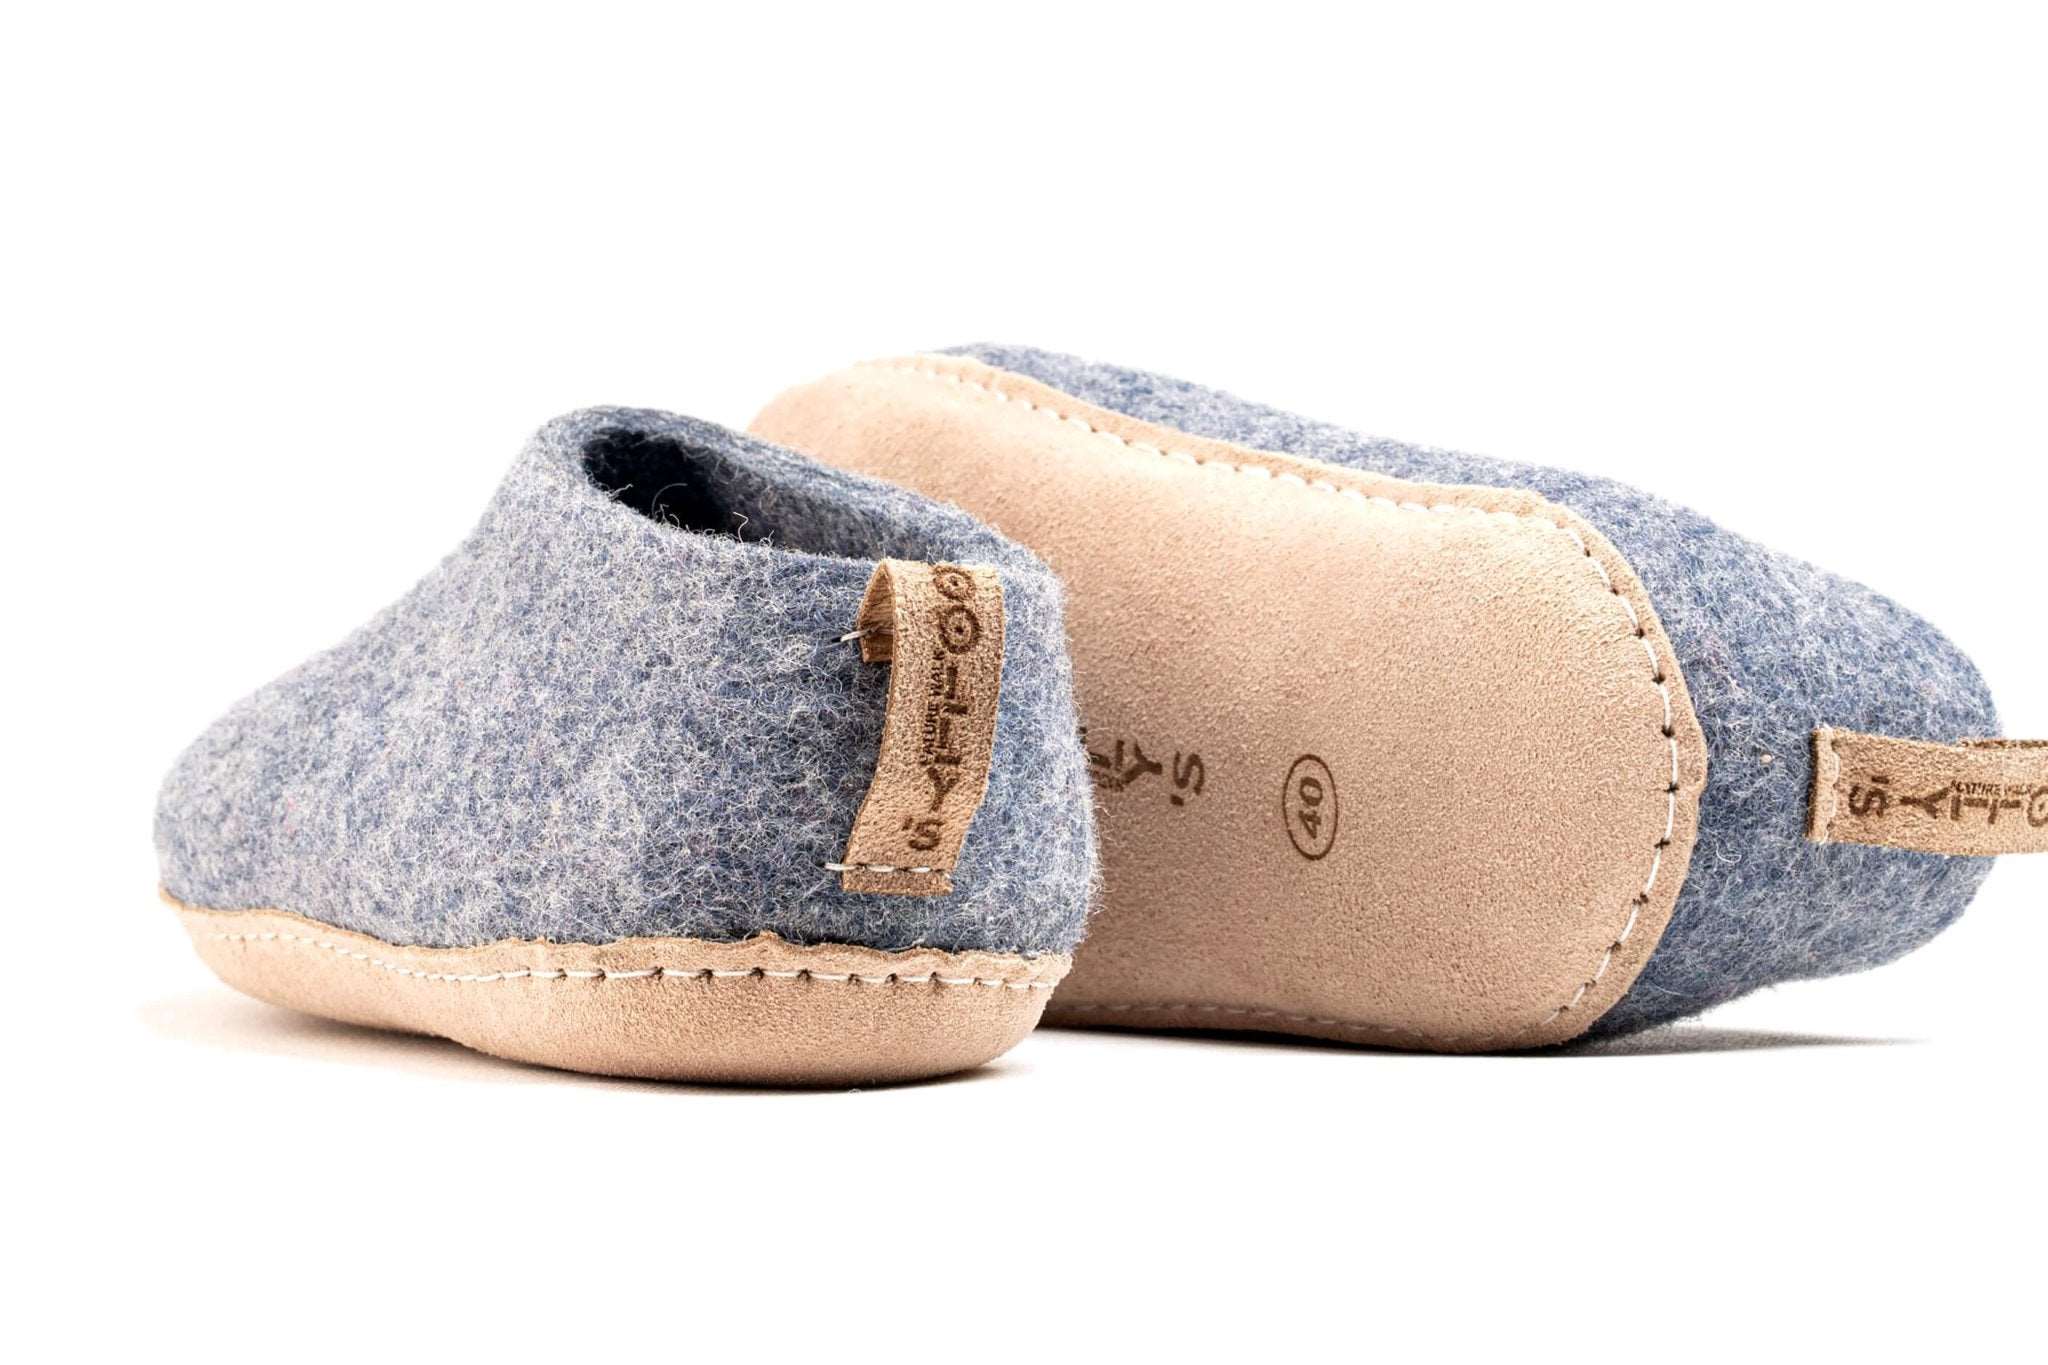 Indoor Shoes With Leather Sole - Denim - Woollyes